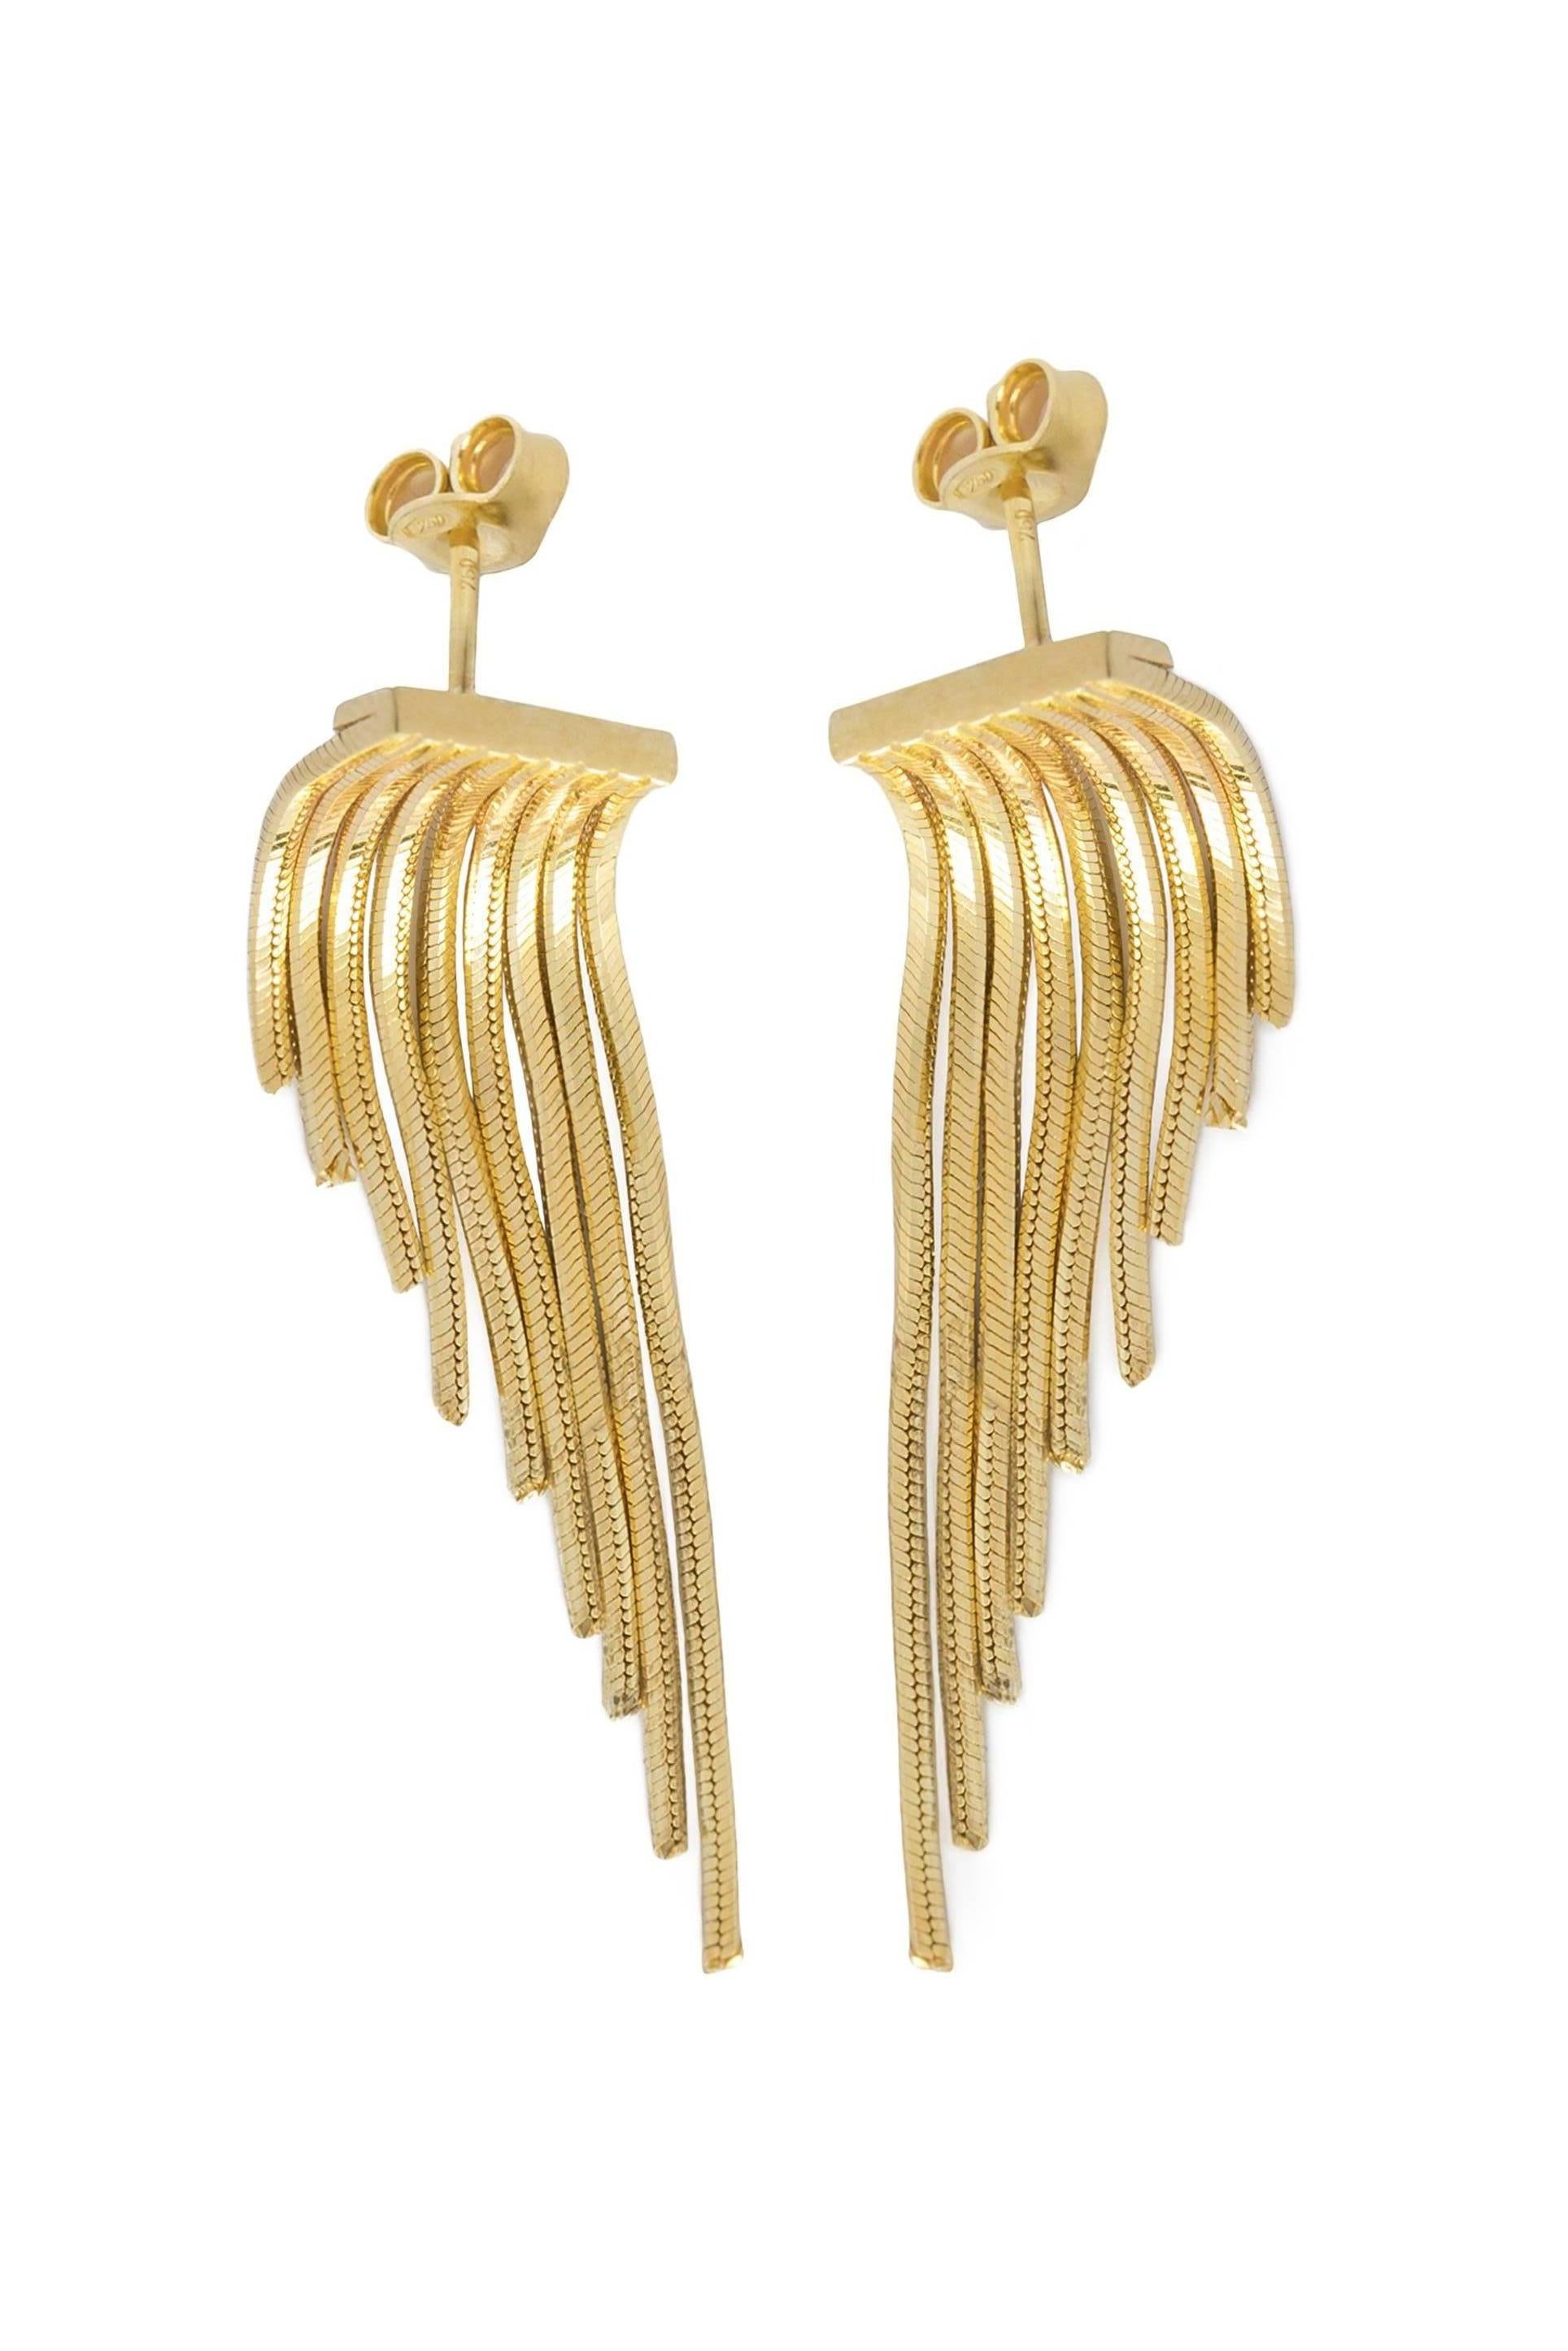 Classic shapes are updated with the inspiration of wings with this pair of earrings from Iosselliani. Specularly designed, the fringed pair is crafted with a cascade of 18 karat gold chains to lend swinging glamour to your daliy wear. Butterfly post